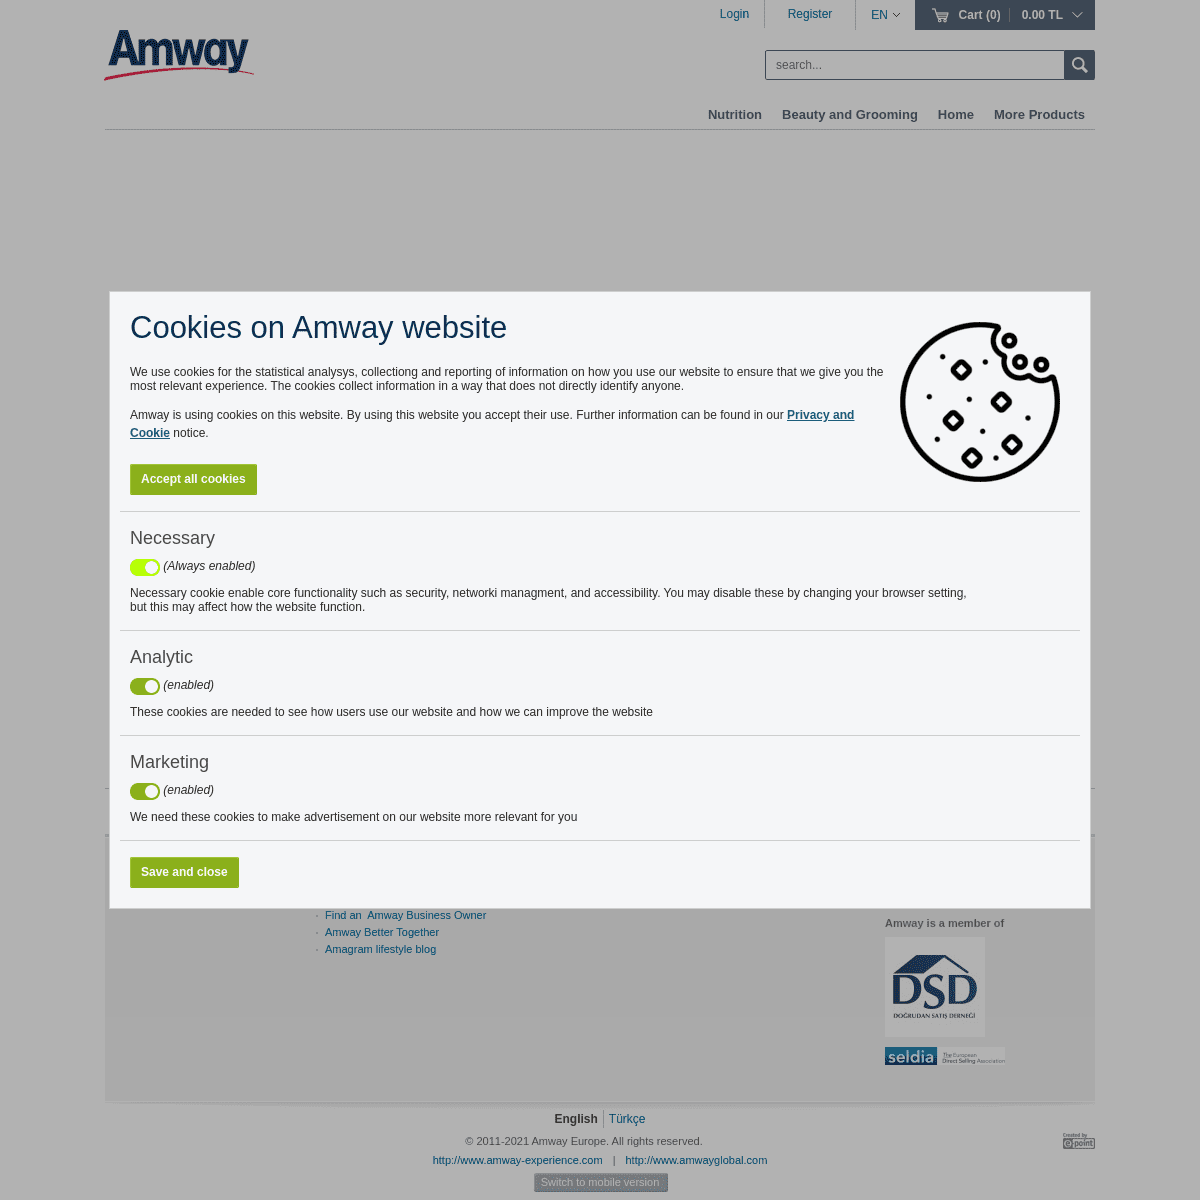 A complete backup of https://amway.com.tr